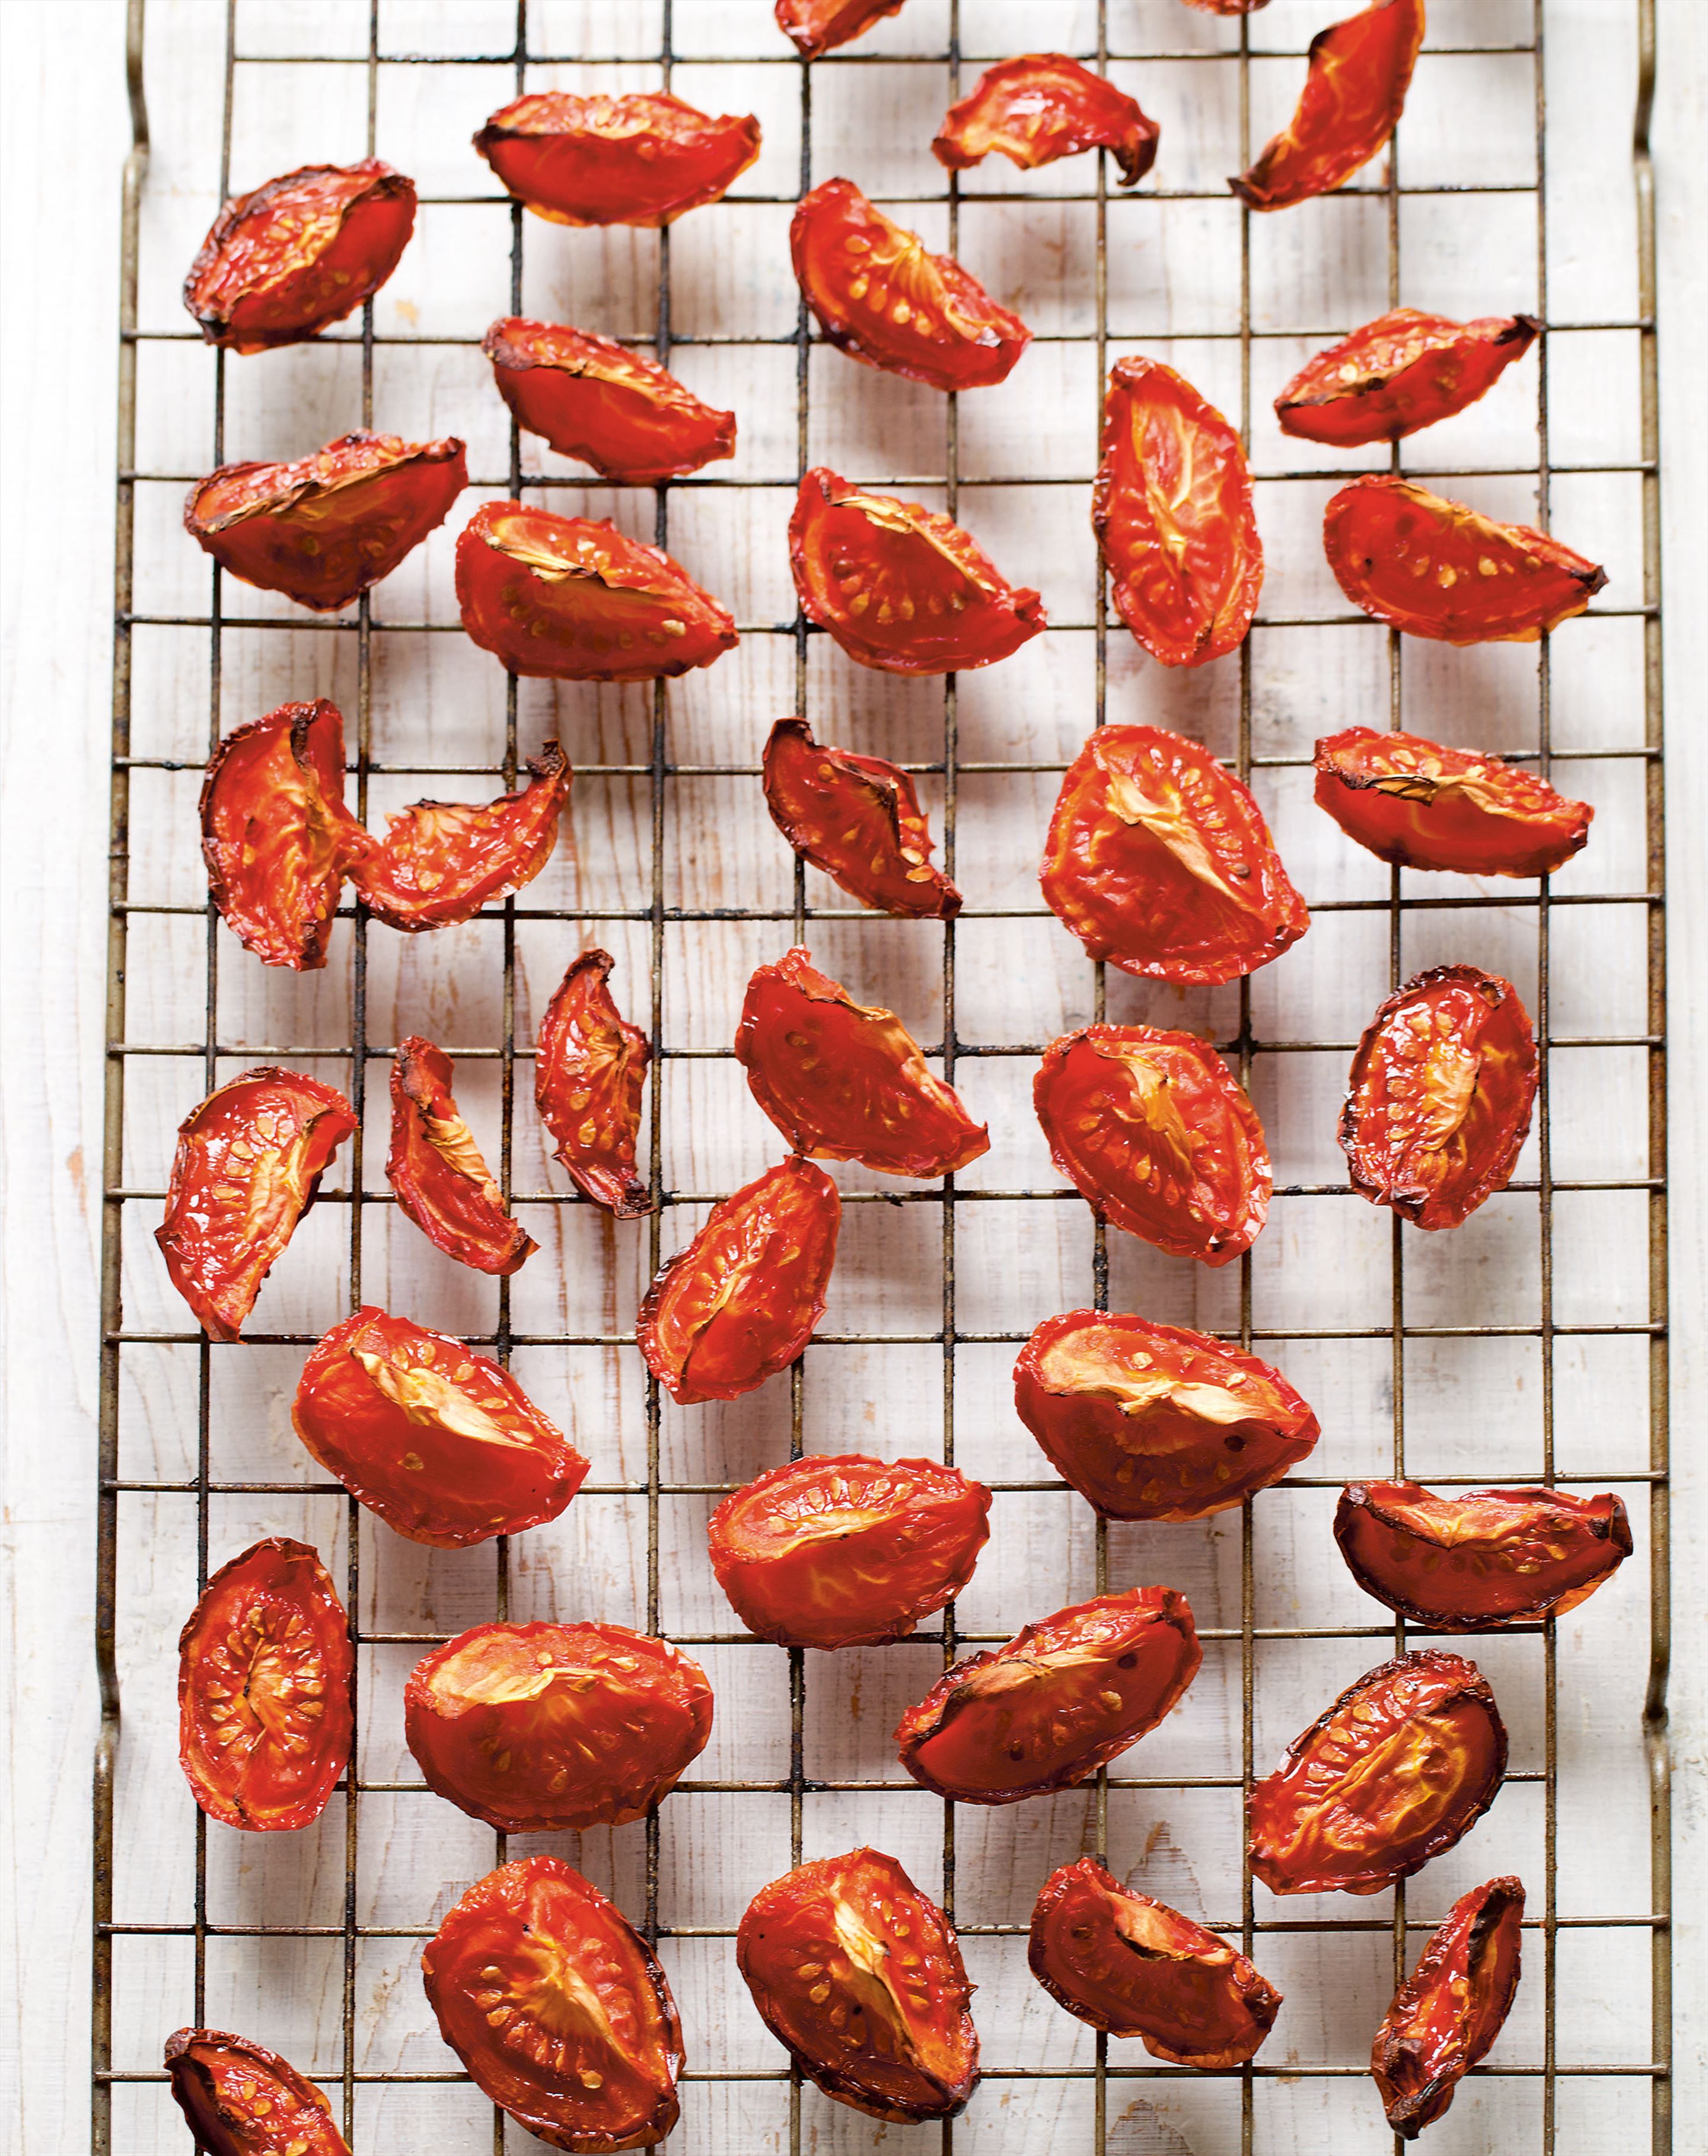 Oven-dried tomatoes in garlic oil